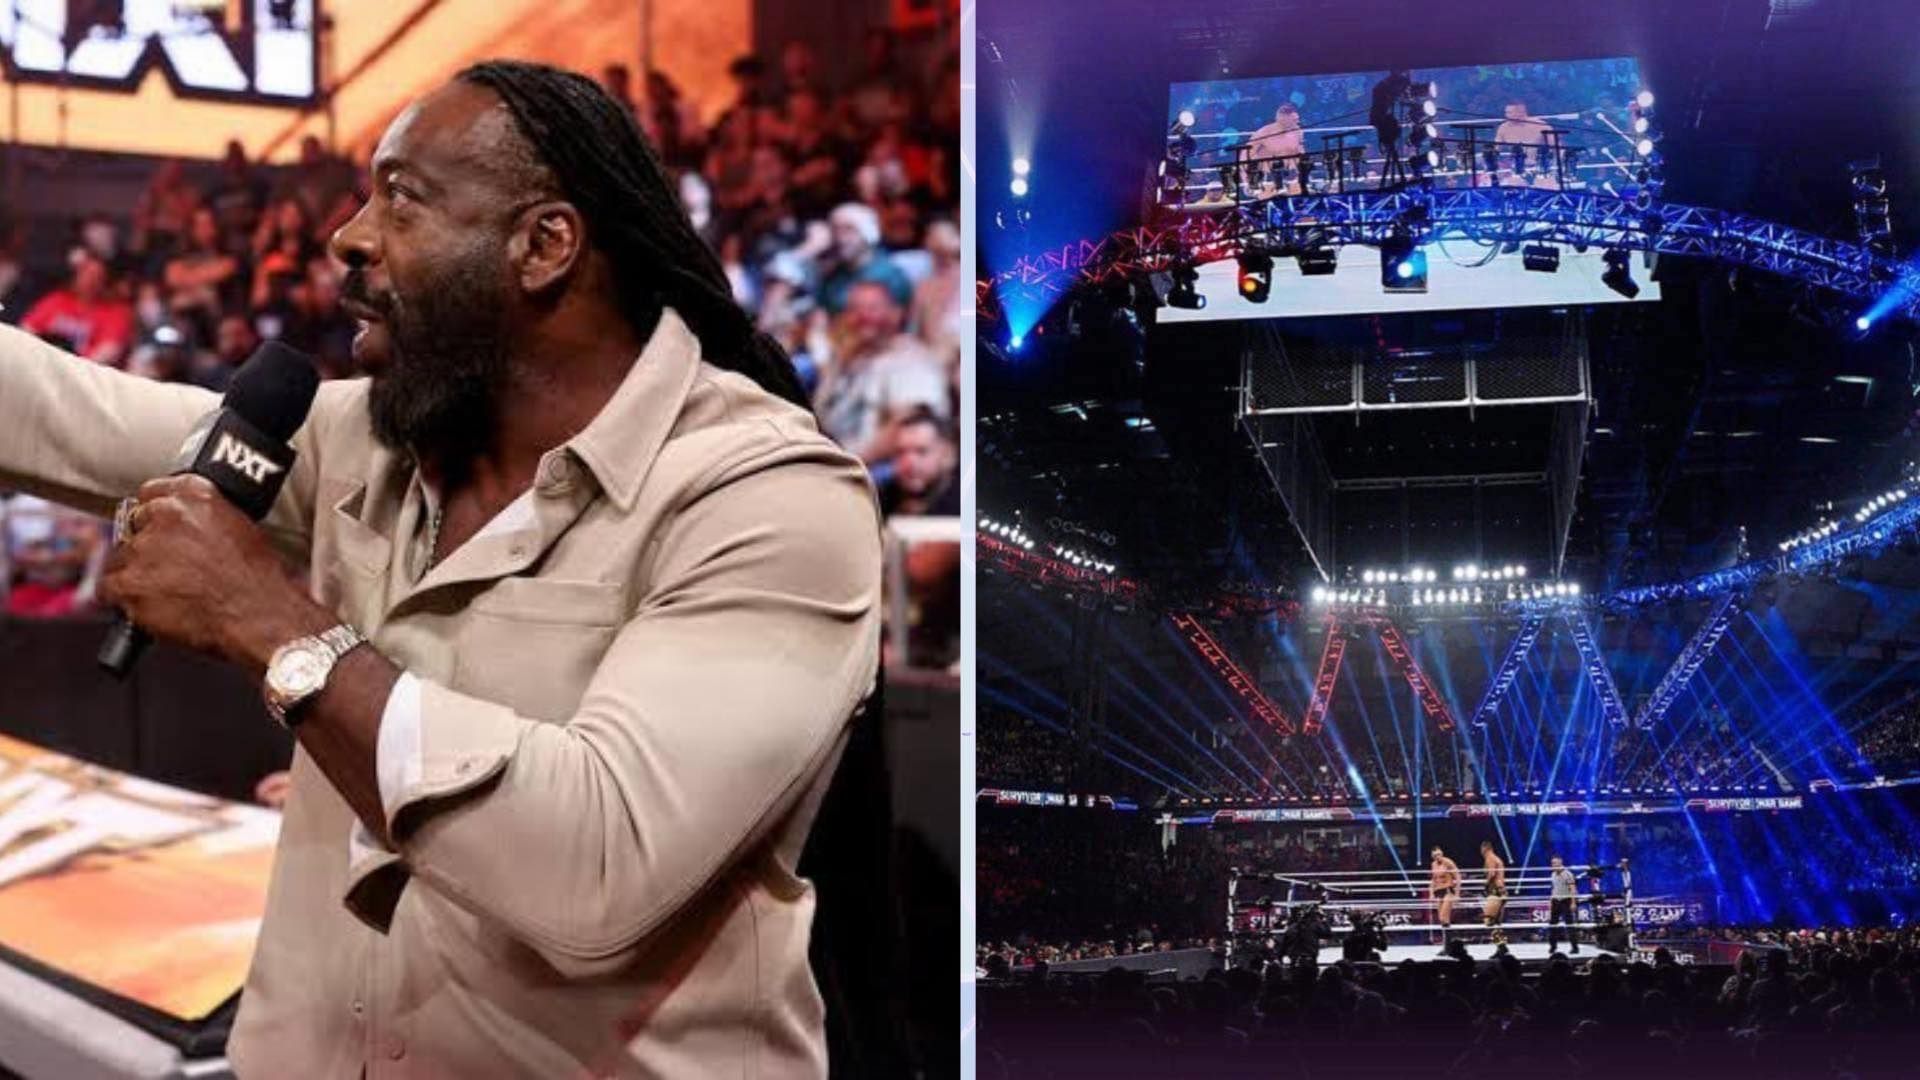 Booker T receives a nod for cross-promotion wrestling appearance by former WWE superstar [Image Credits: WWE]